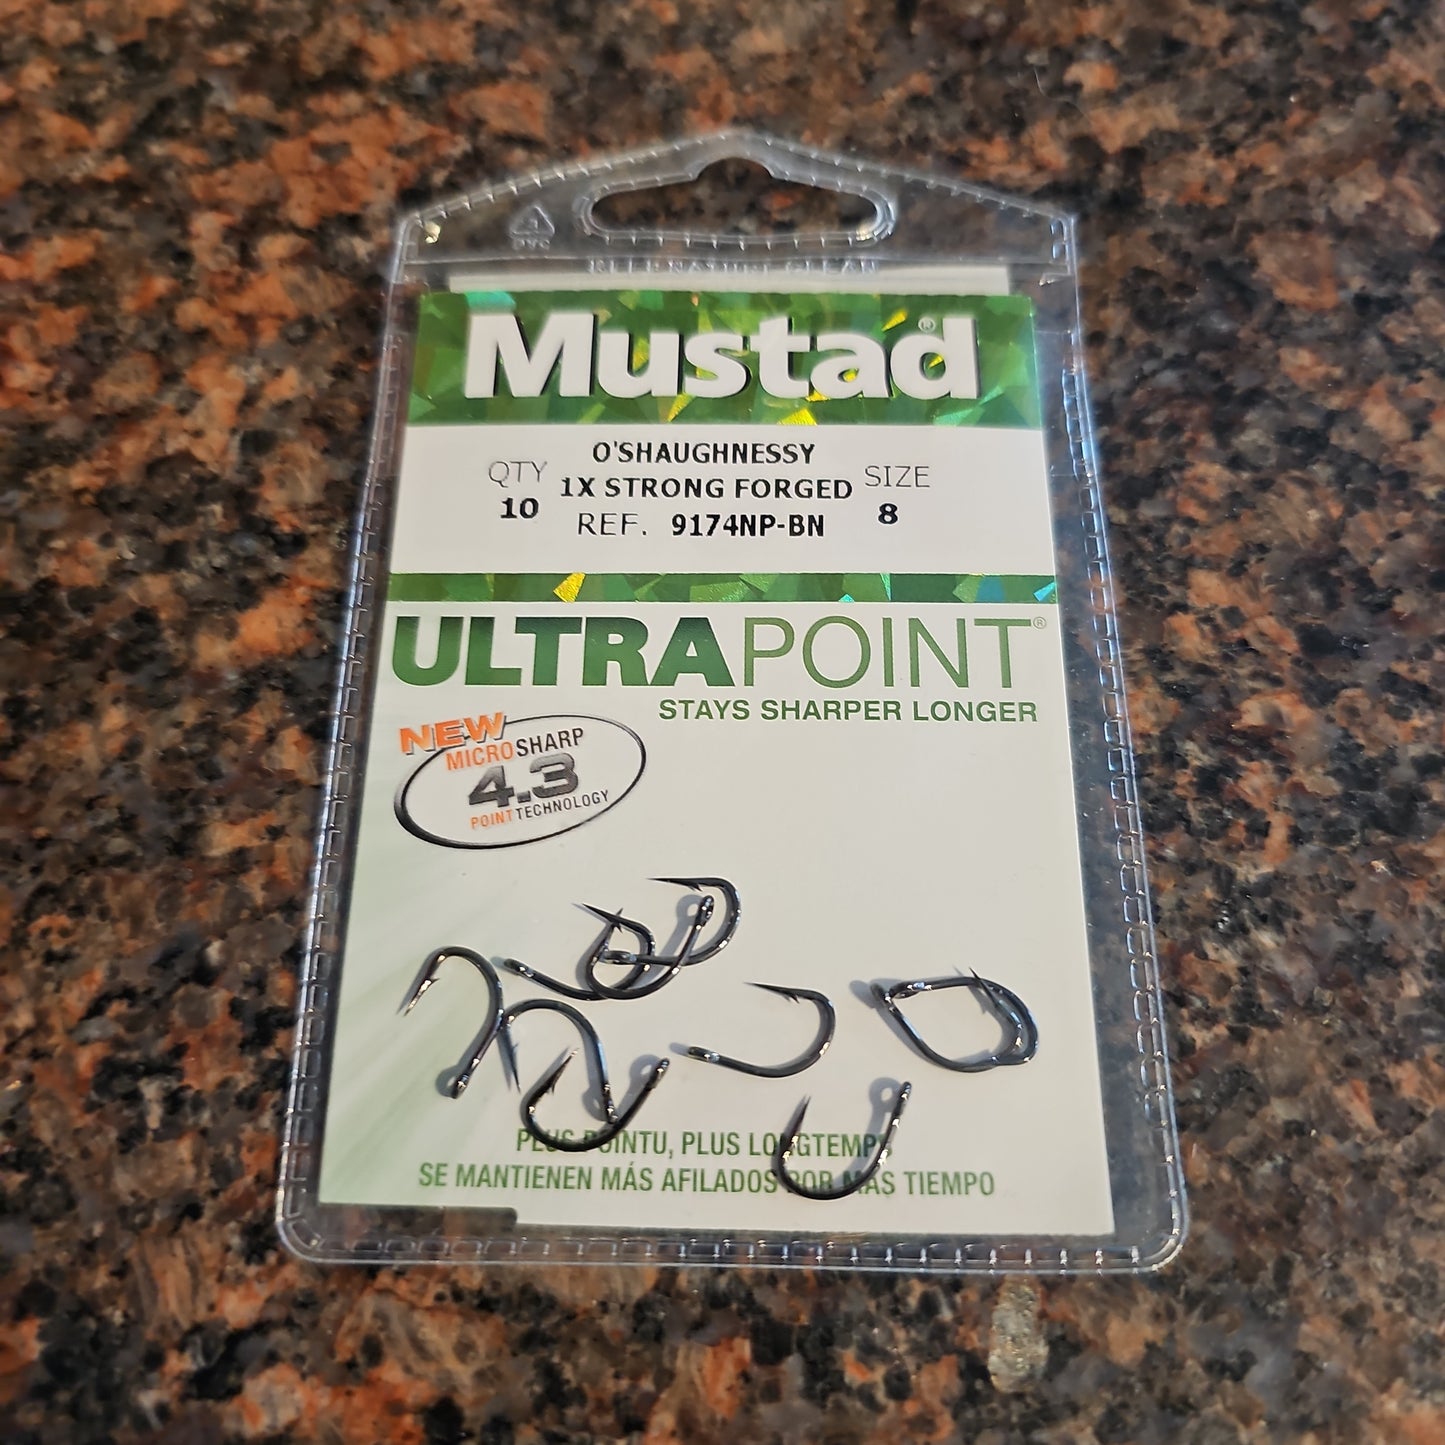 Mustad 9174NP-BN-8 O’Shaughnessy 1X Strong Forged Ultrapoint Fishing Hooks Set 2